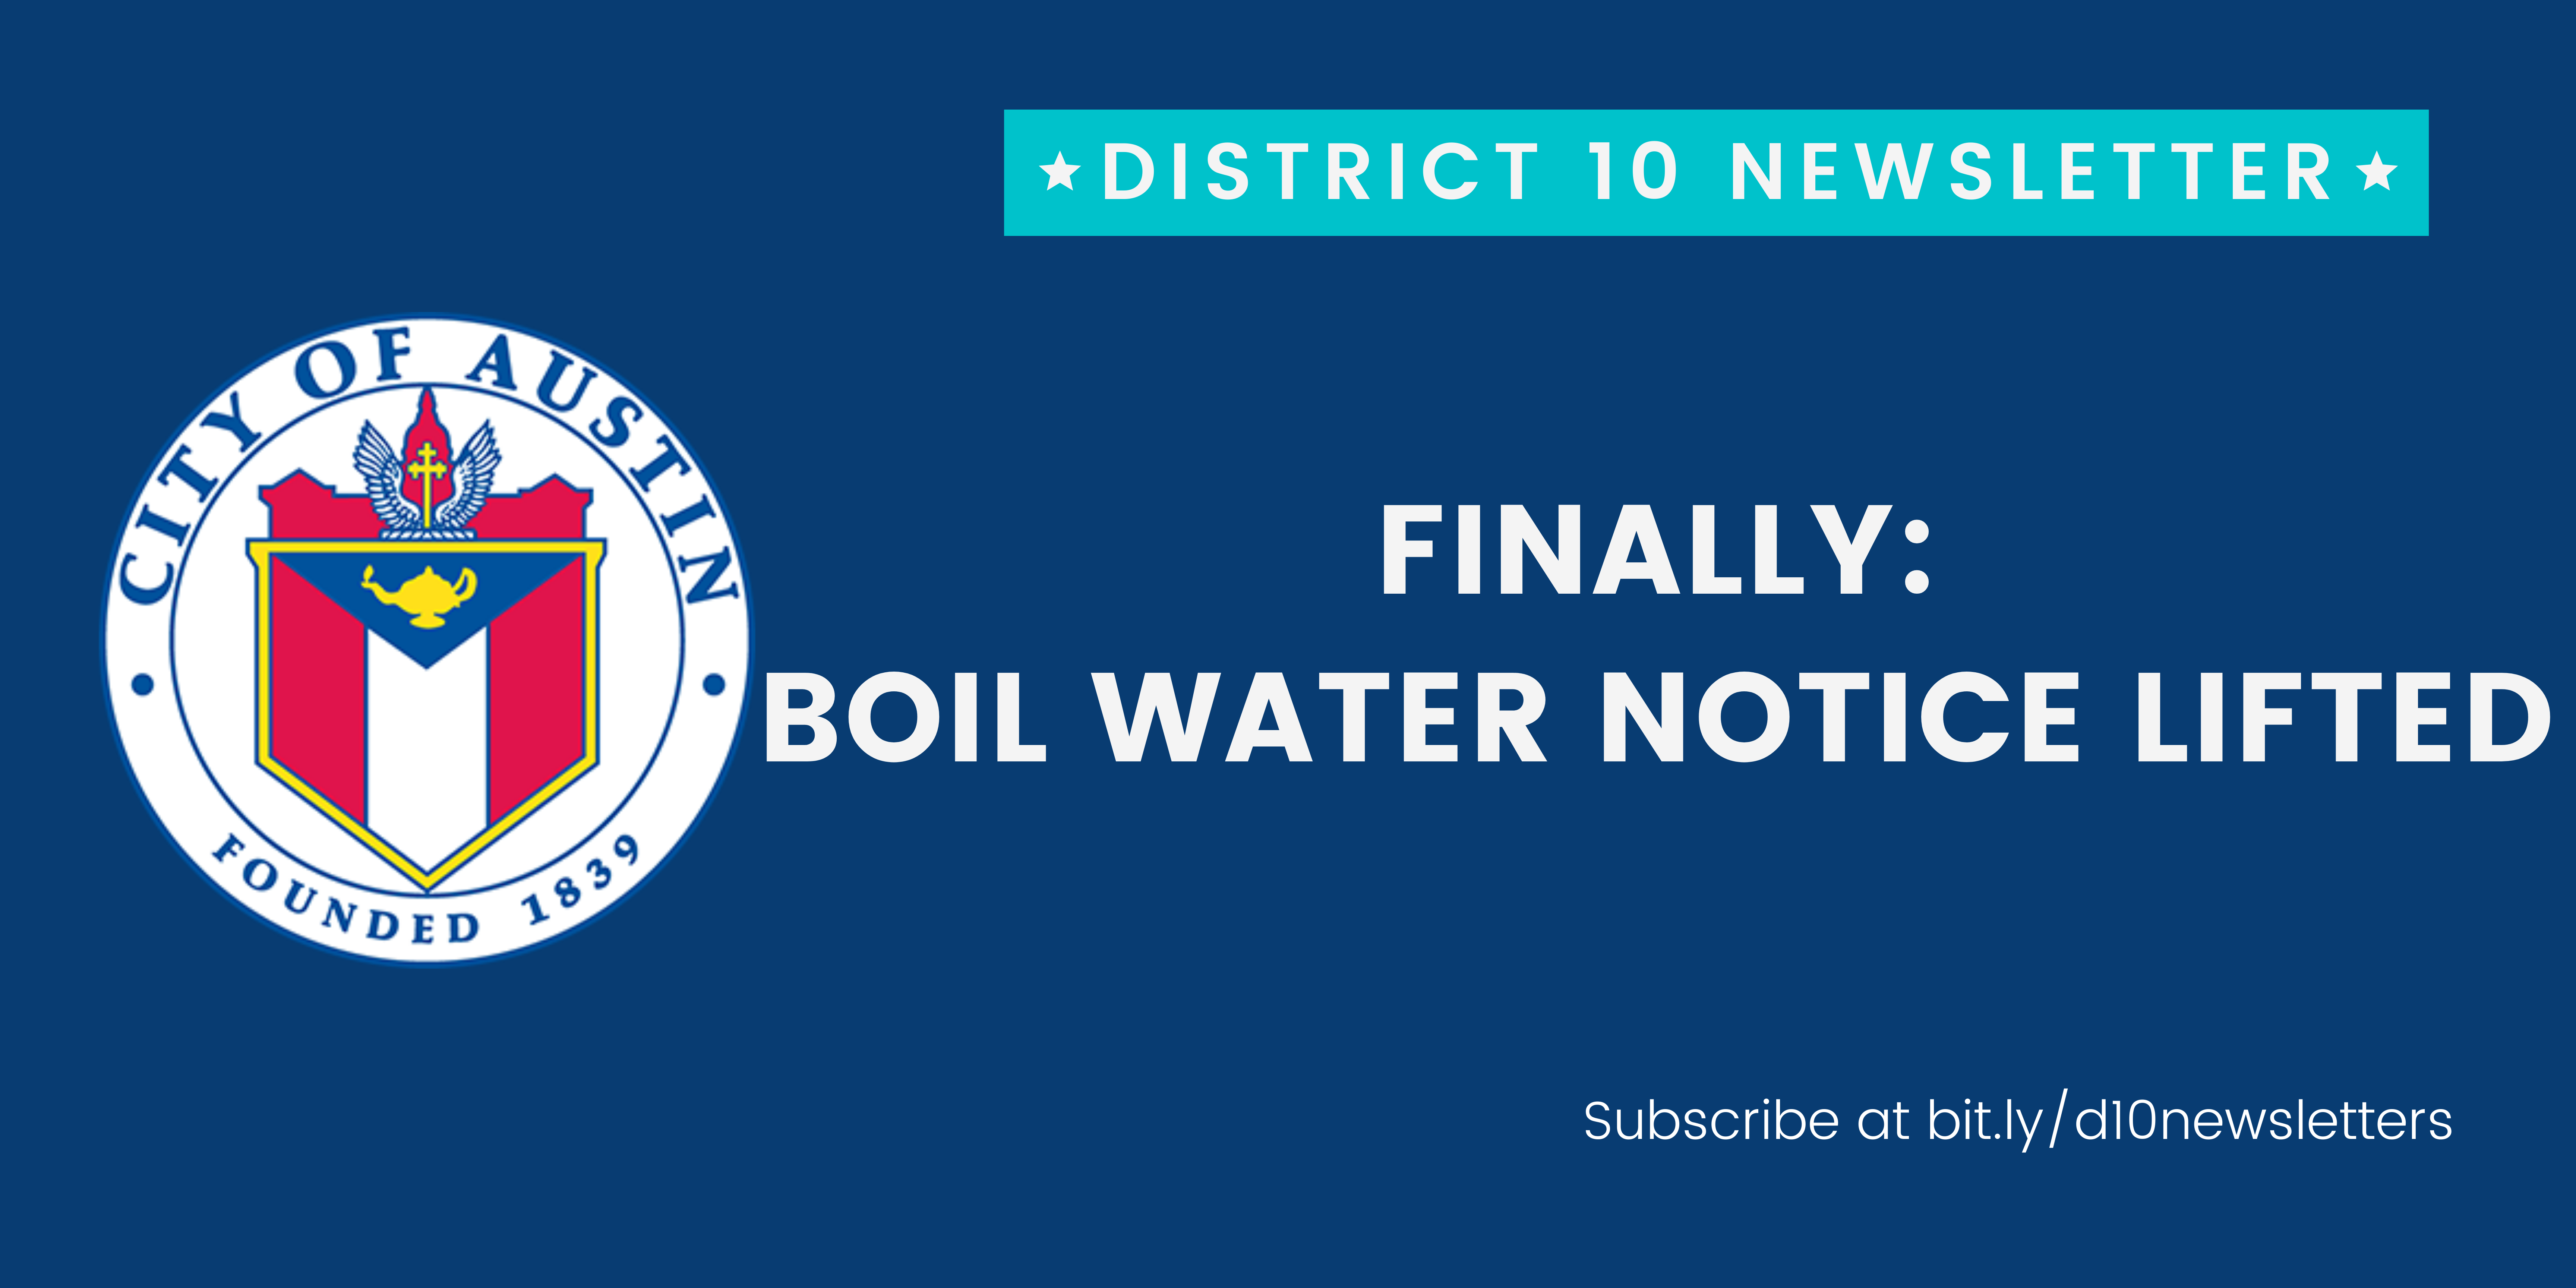 finally: boil water notice lifted